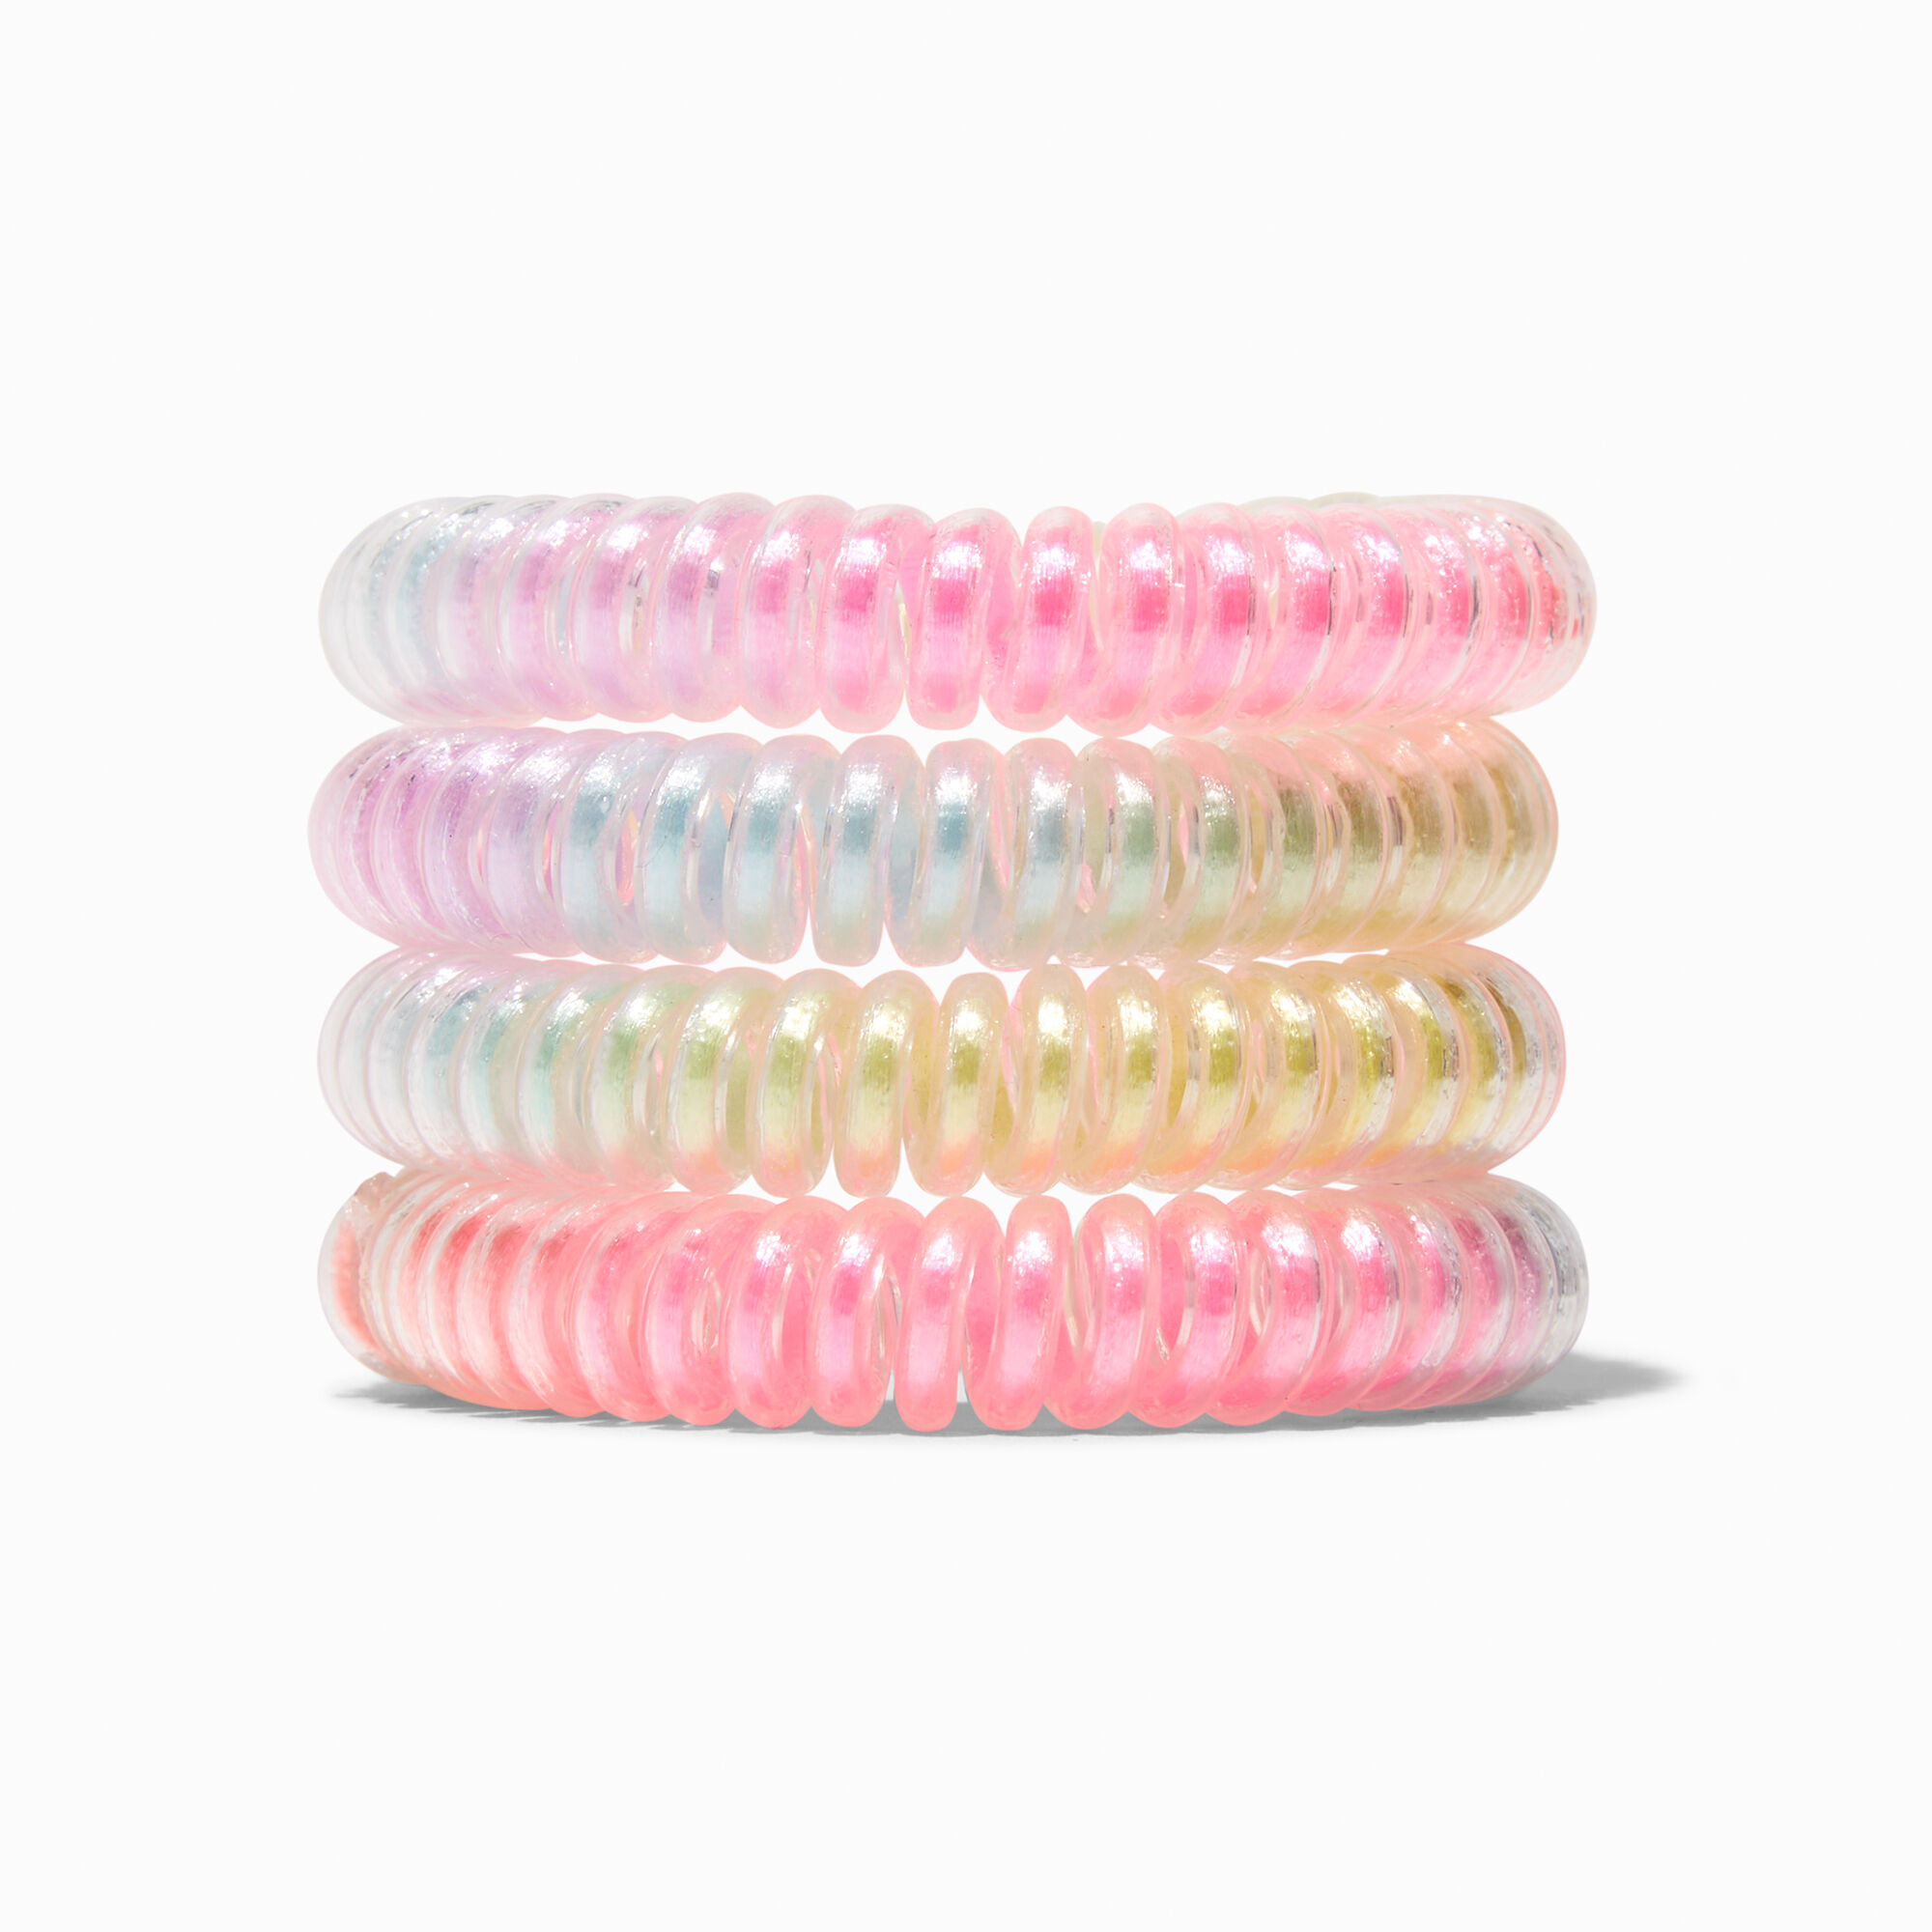 View Claires Iridescent Pastels Spiral Hair Ties 4 Pack Bracelet information